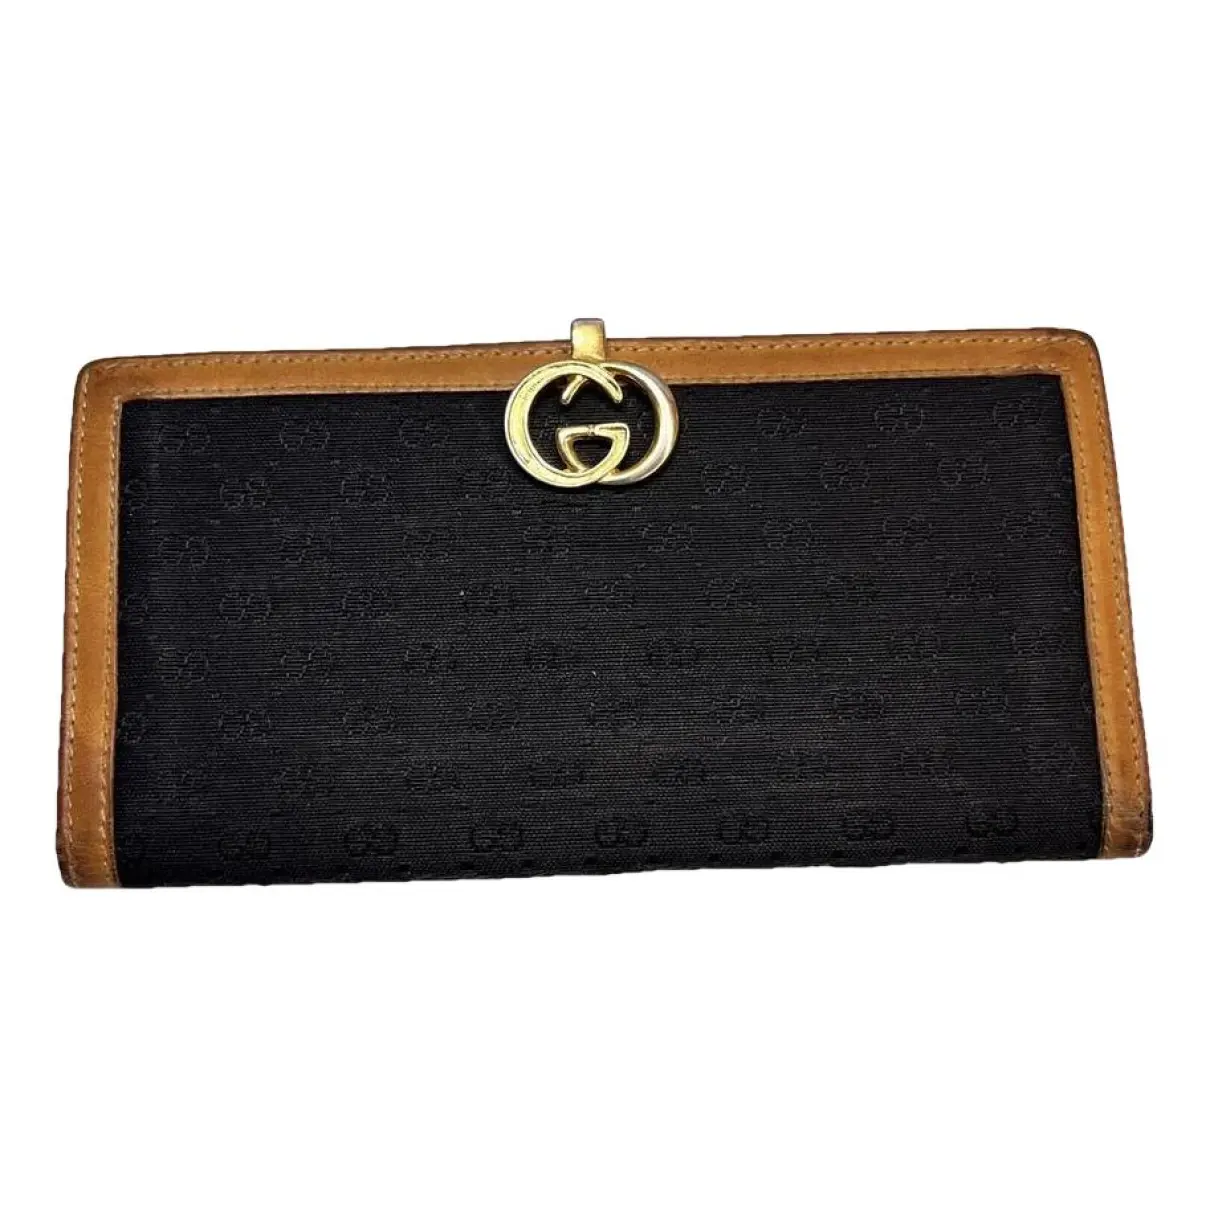 Continental leather wallet